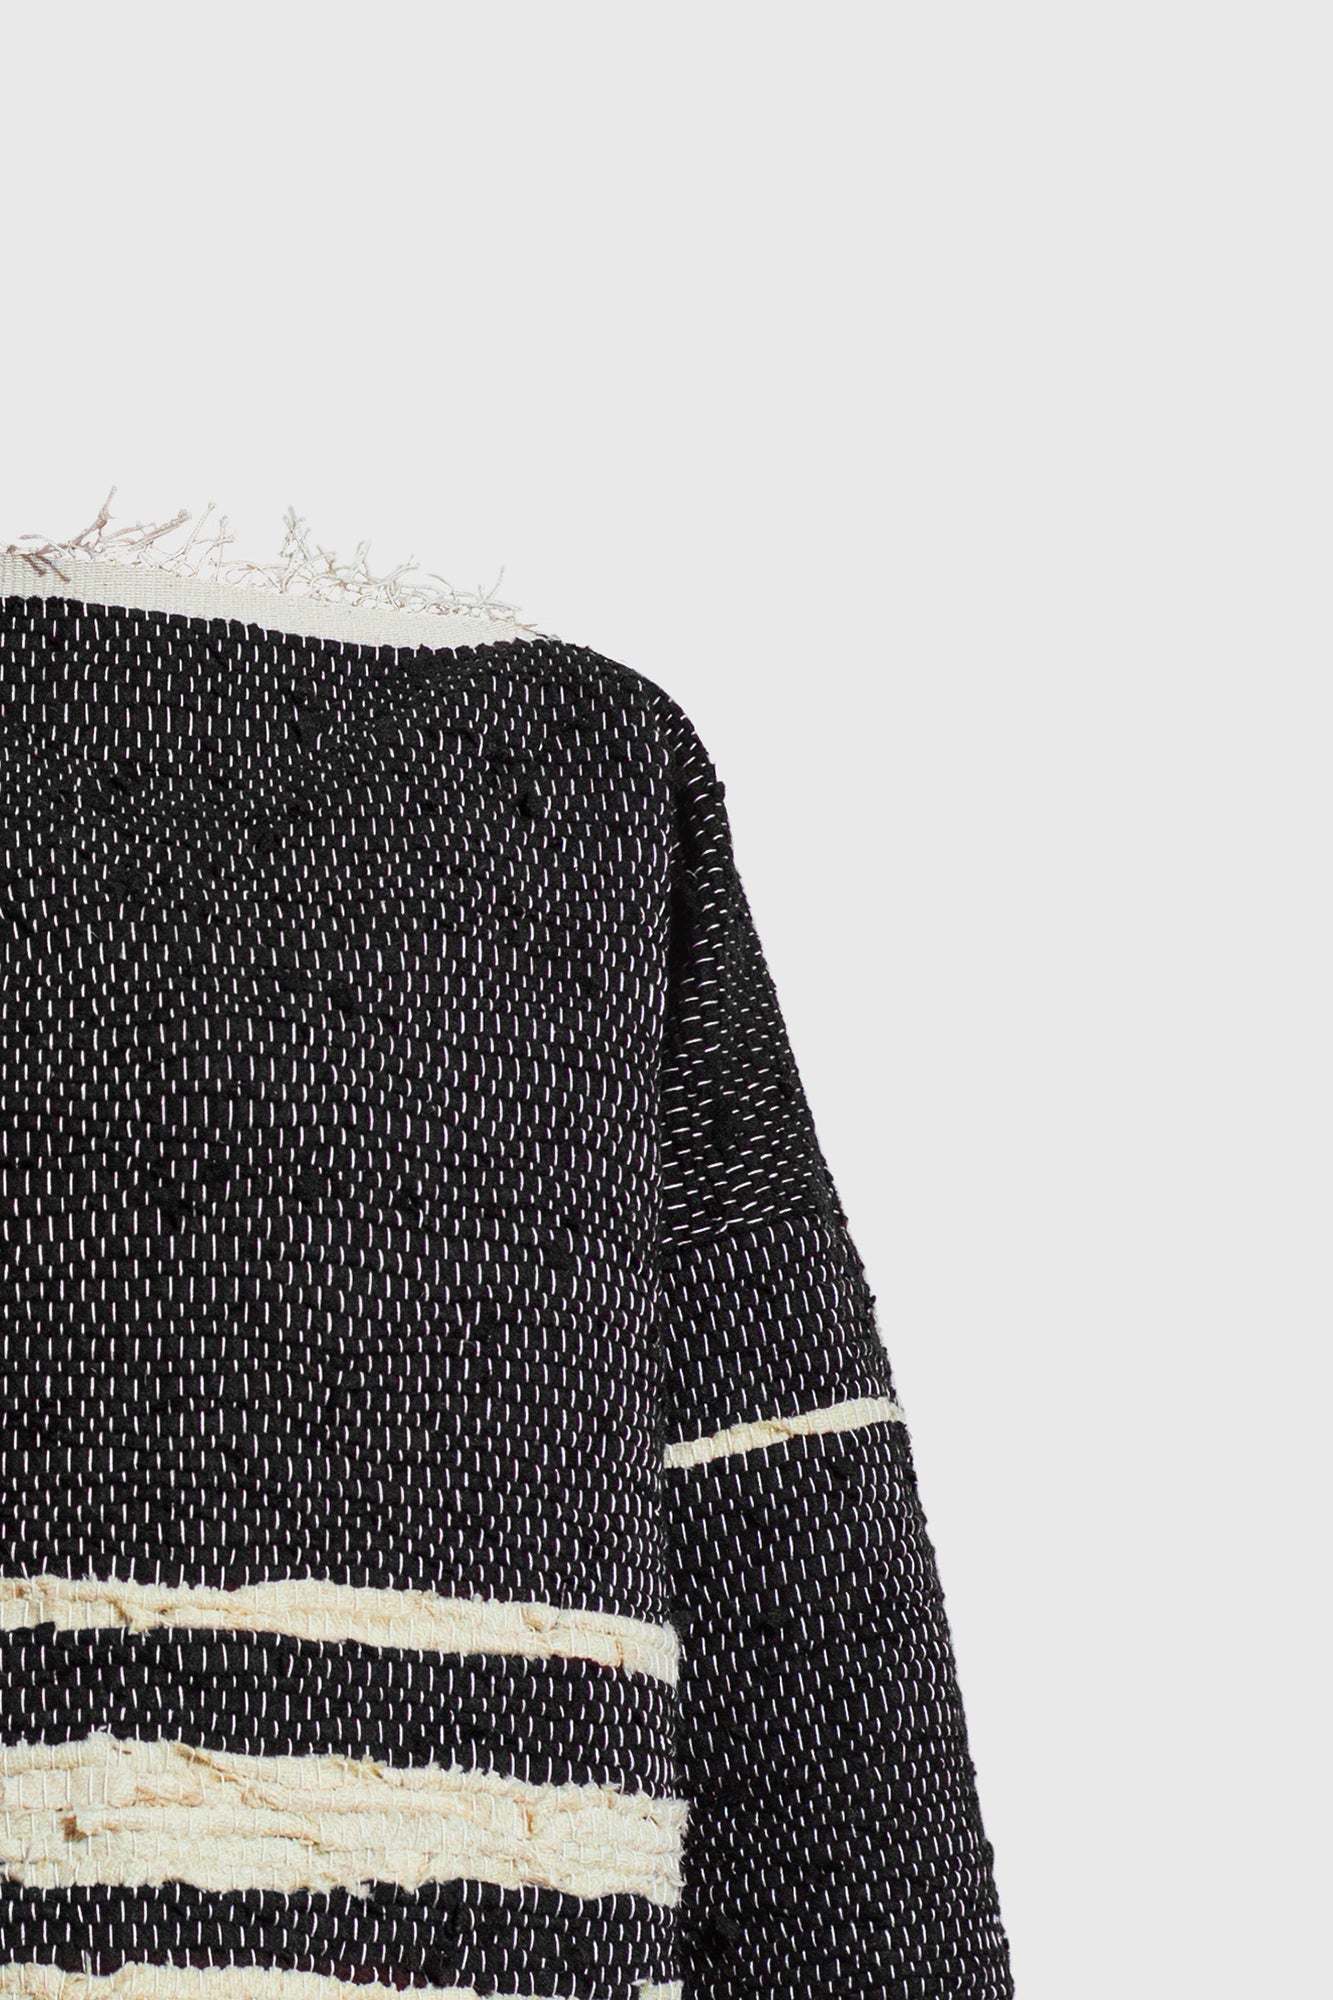 Ruxandra luxury fashion, woven details on woven sweater, fine finish, hip hop artist style, rich kids fashion, Instagramer style, influencer outfit, personal style shopper, luxury clothing, black and white stripes, cool fashion